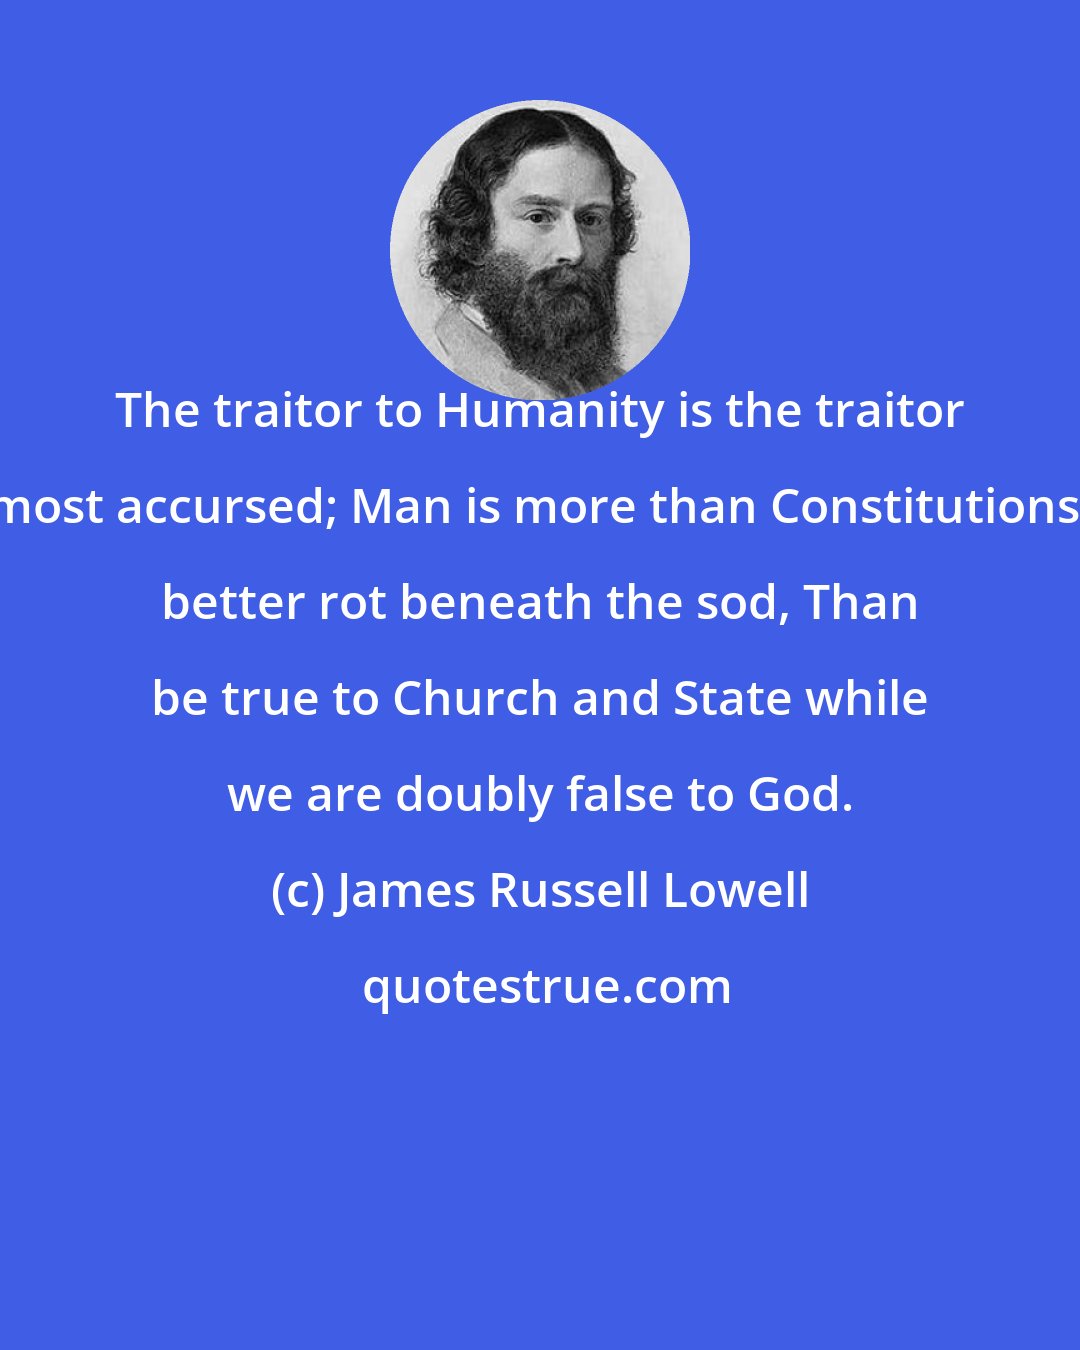 James Russell Lowell: The traitor to Humanity is the traitor most accursed; Man is more than Constitutions; better rot beneath the sod, Than be true to Church and State while we are doubly false to God.